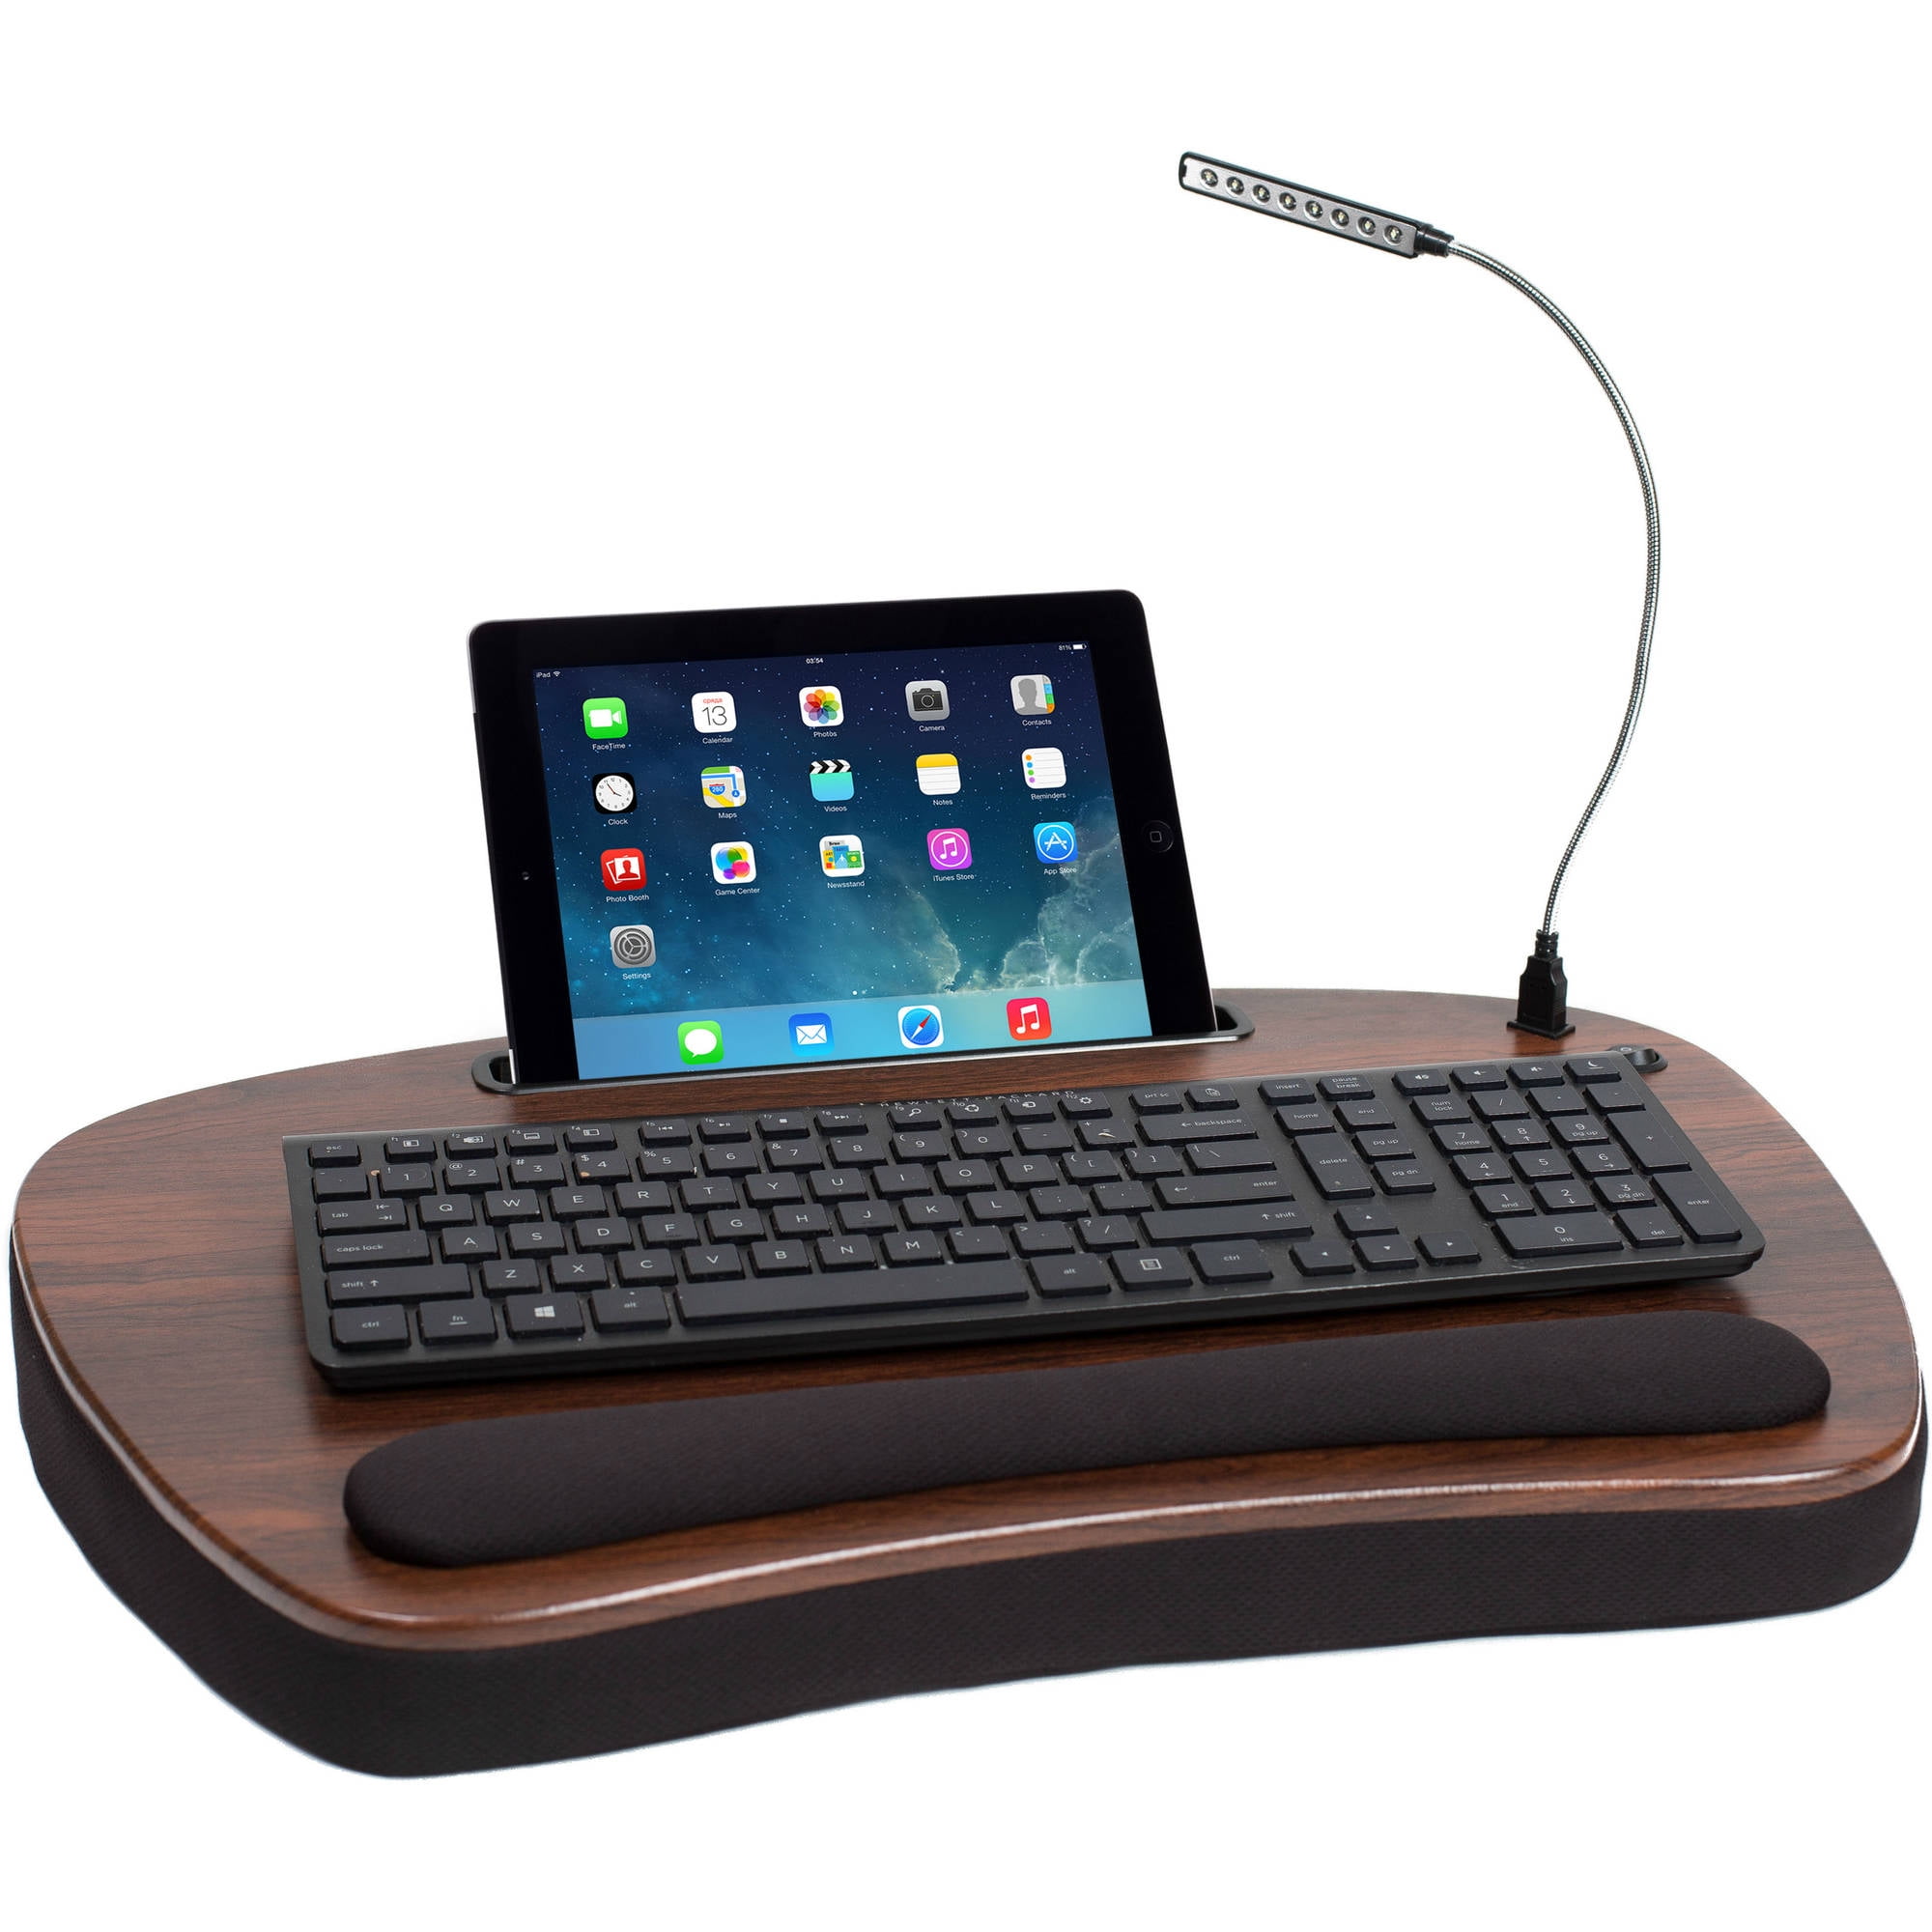 Black Supports Laptops Up to 20 Inches Sofia Sam Oversized Wood Top Memory Foam Lap Desk with Detachable USB Light and Tablet Slot